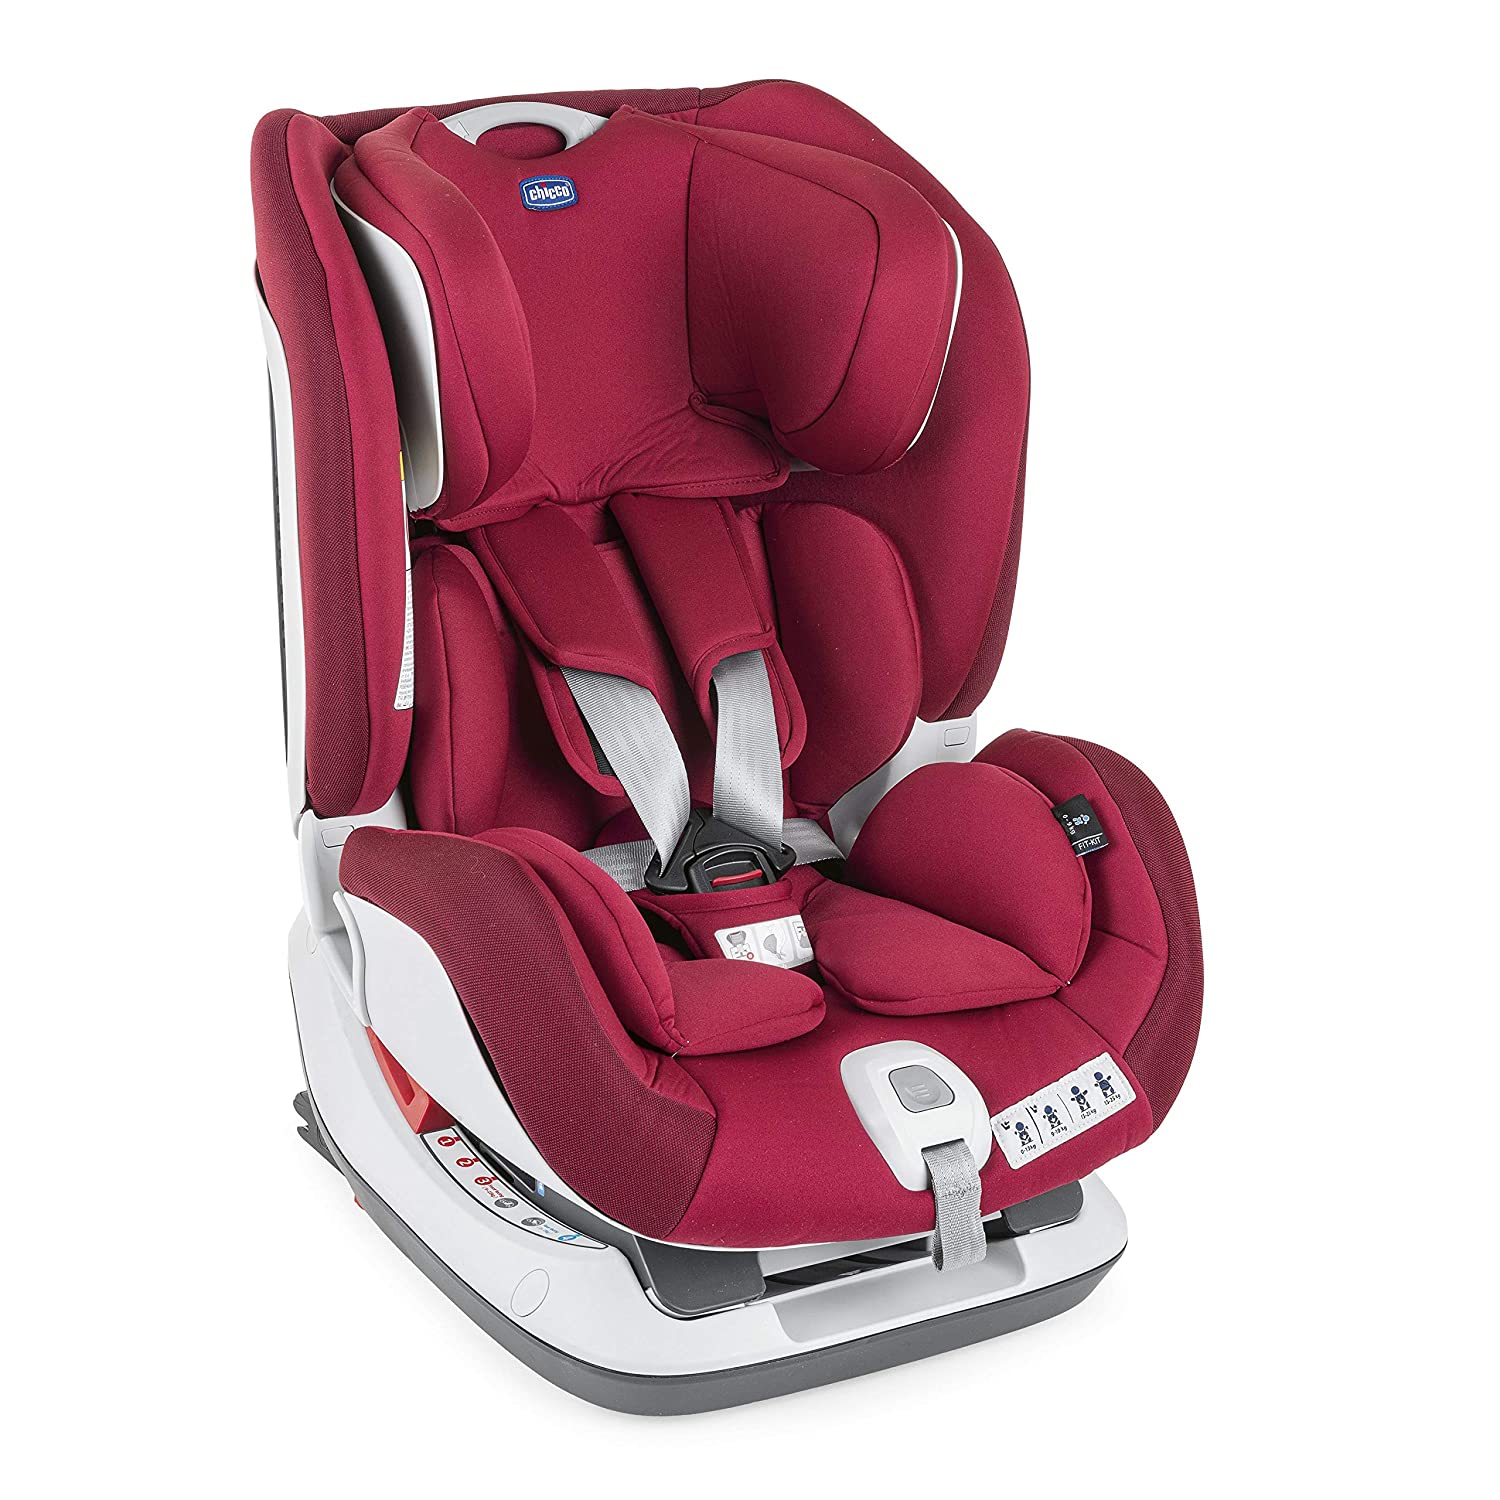 Chicco 07079828640000 Child Car Seat Seat-Up 012 Red